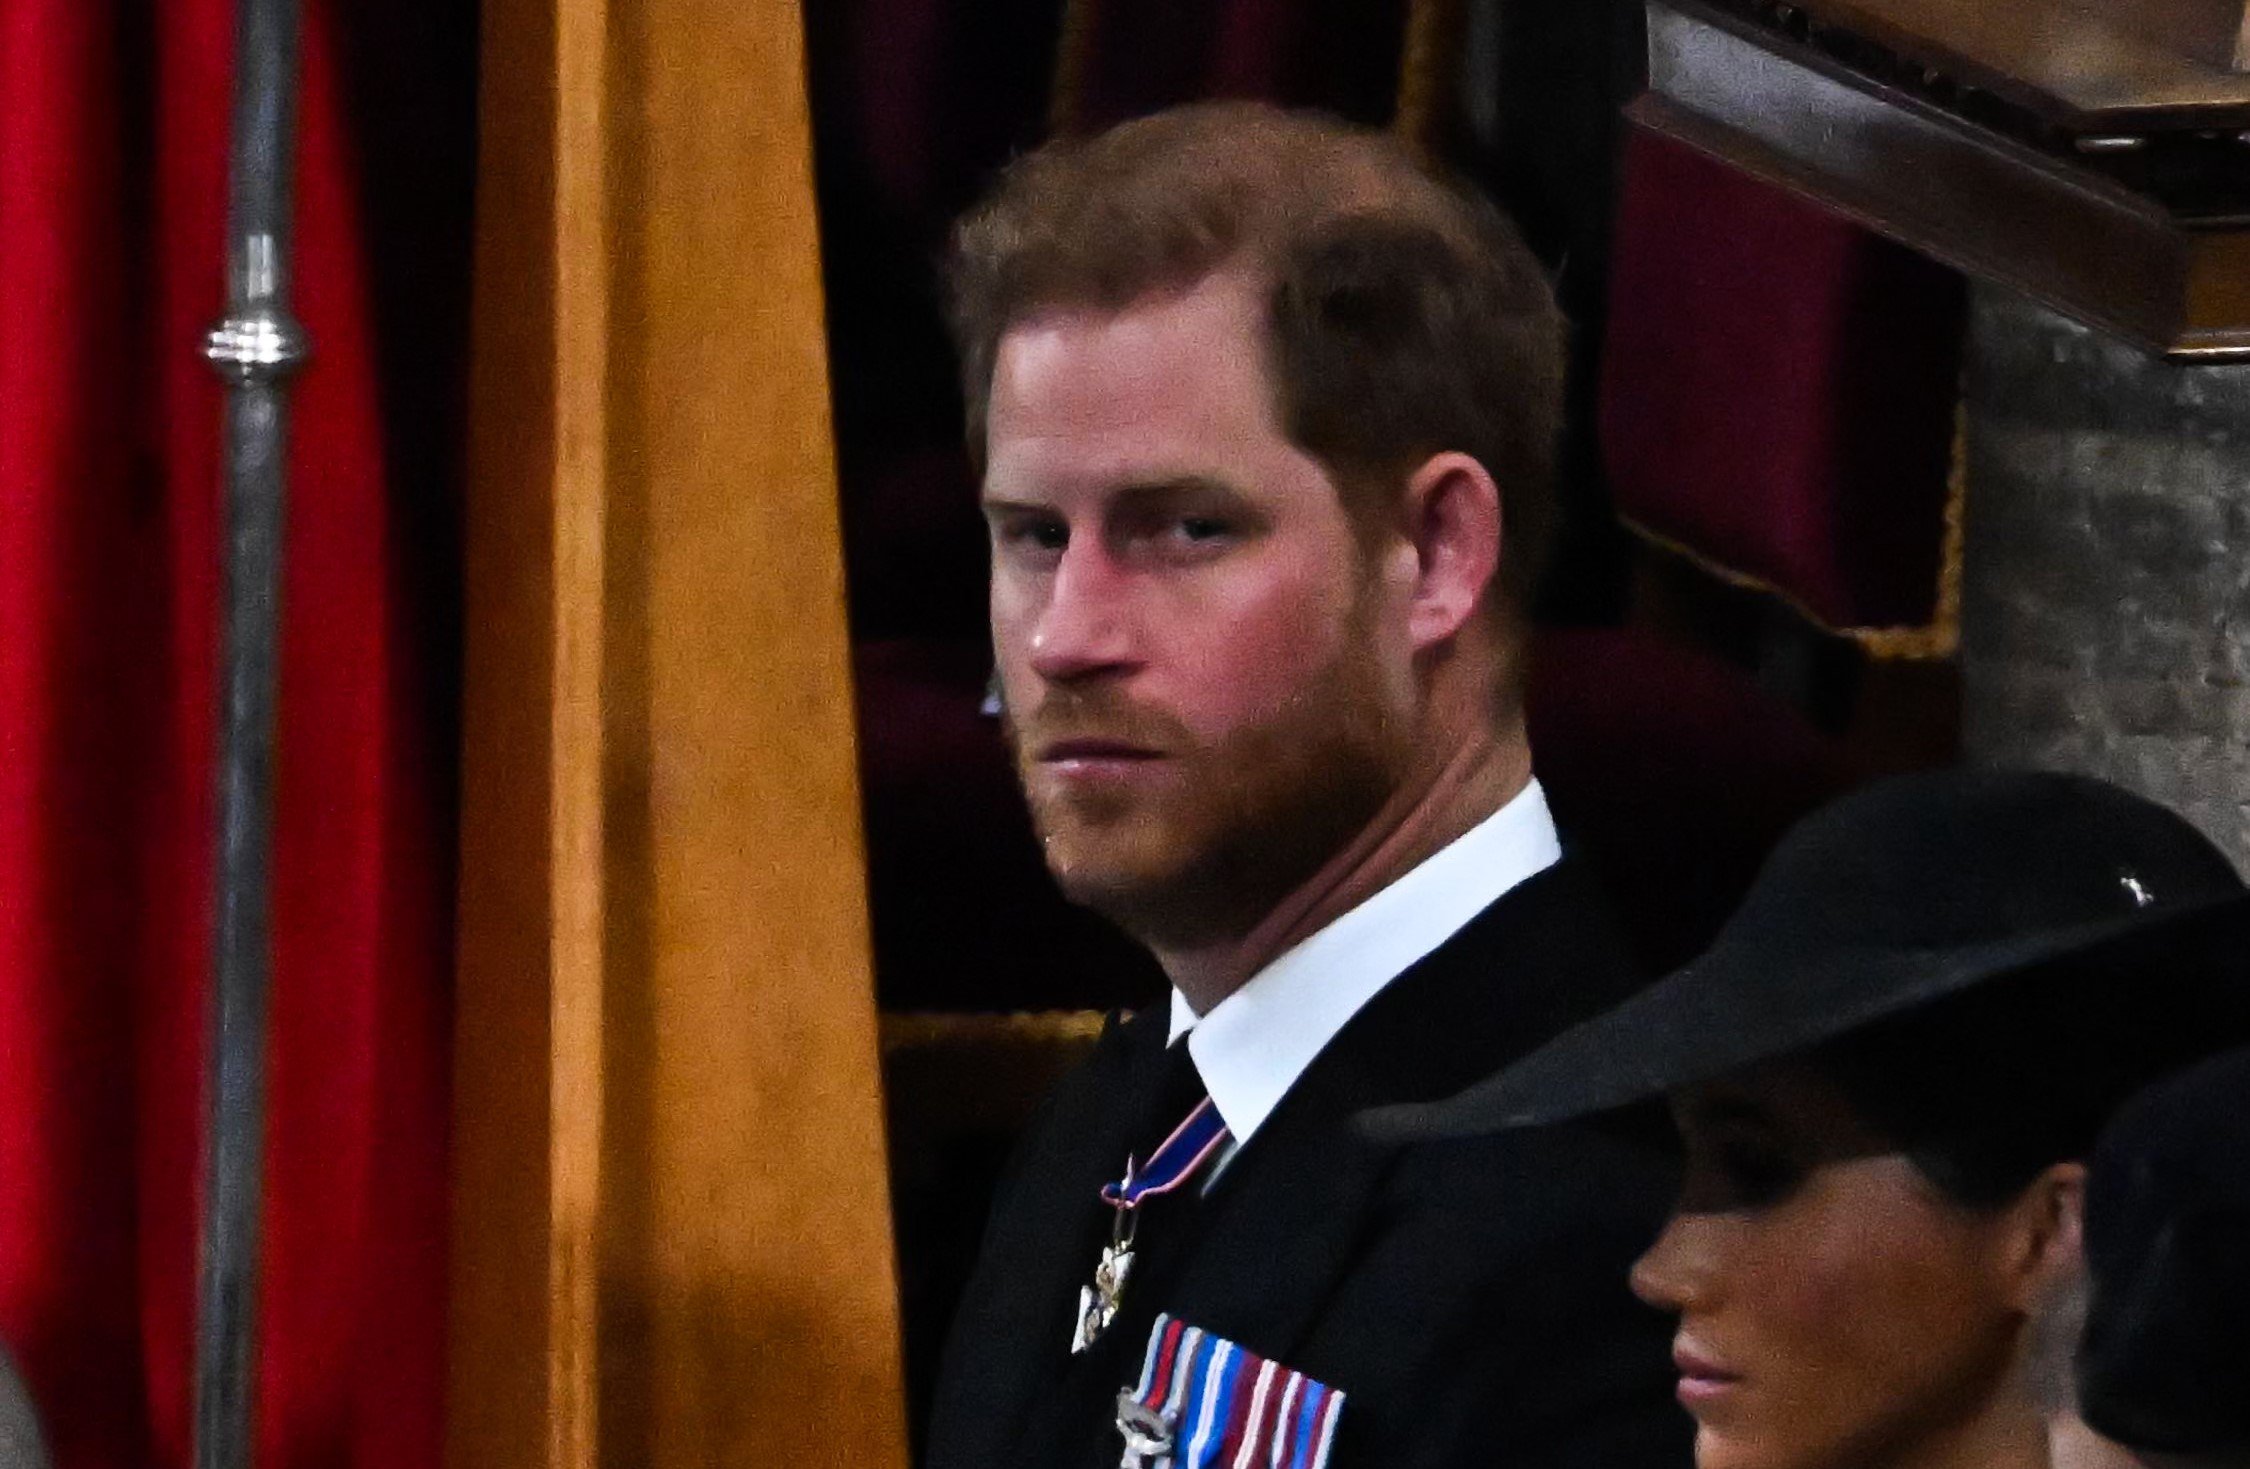 Prince Harry, who an expert said showed a lot of anger during Queen Elizabeth II's funeral, is pictured during the service